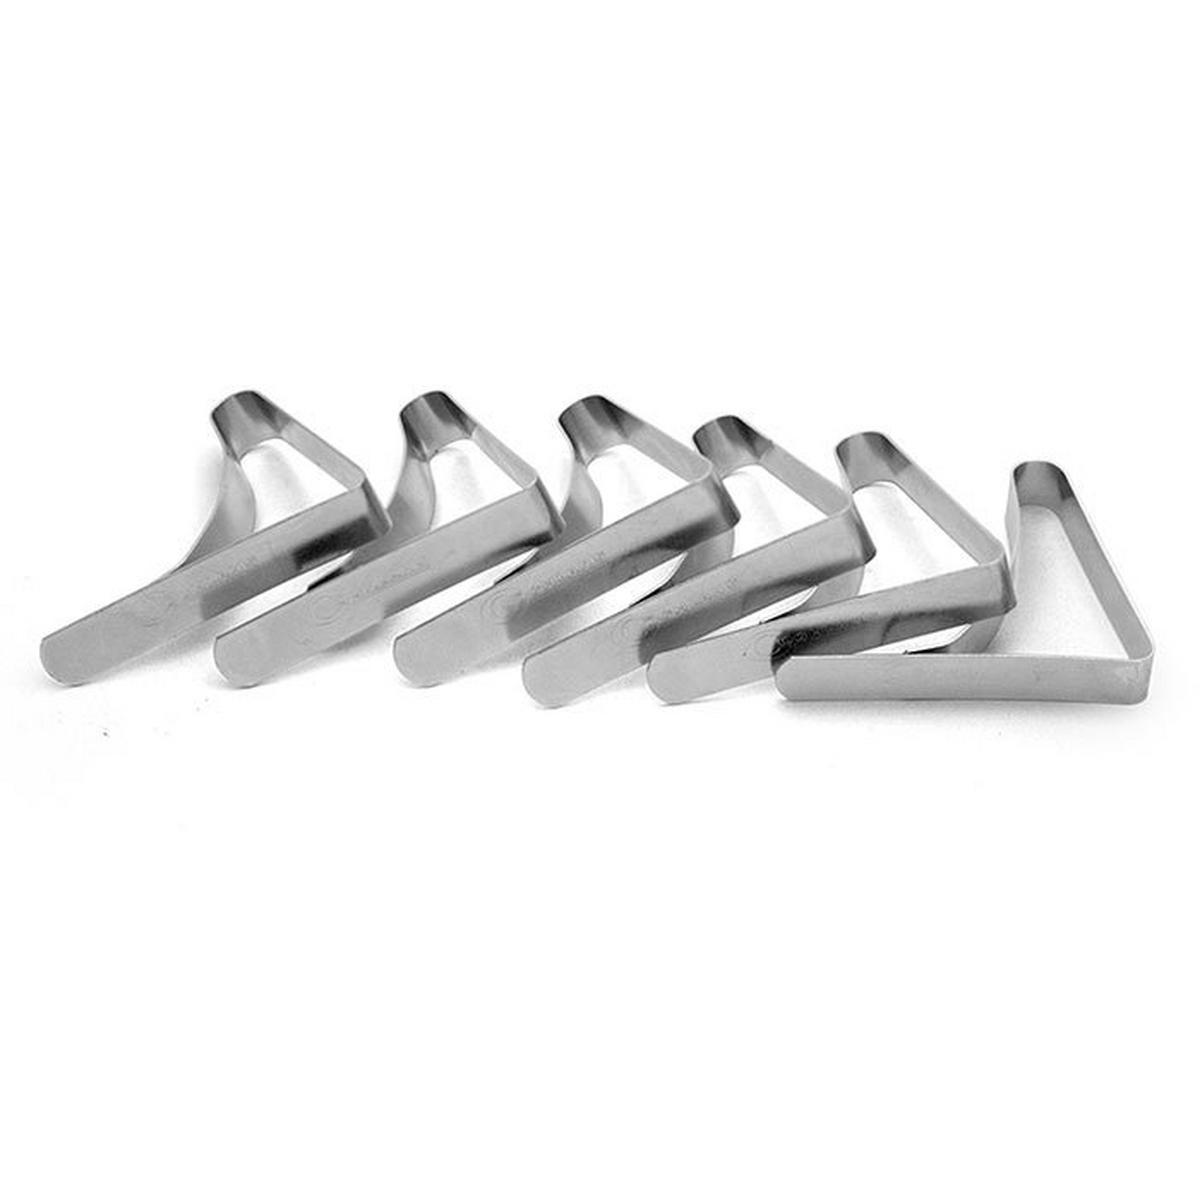 Tablecloth Clamp (6 Pack)